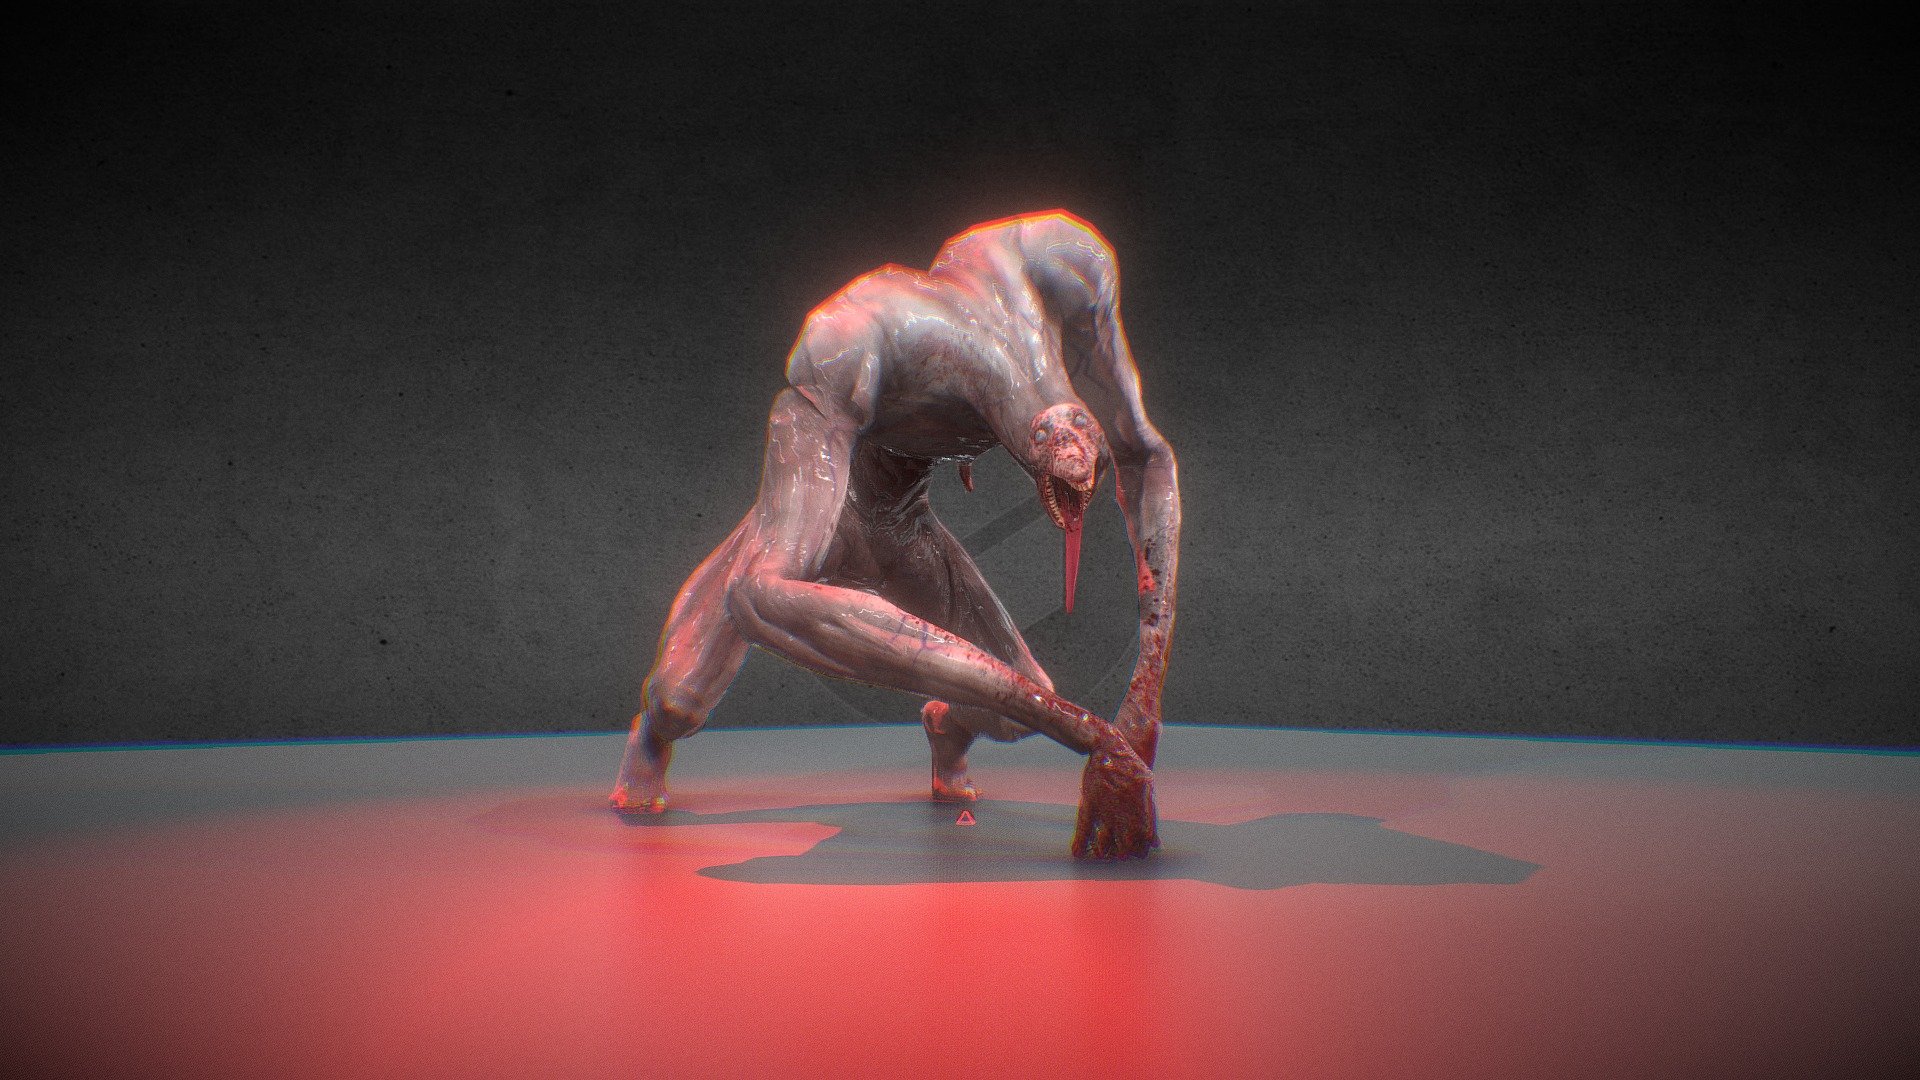 SCP: 427-1 Model and rig from SCP: Unity. We just reached 2.4k likes on things! Last I updated, it was around 600. Thanks for all your support, as we have come a long way since the first upload! (We also got this model specifically to the the FIRST result when searching &ldquo;SCP